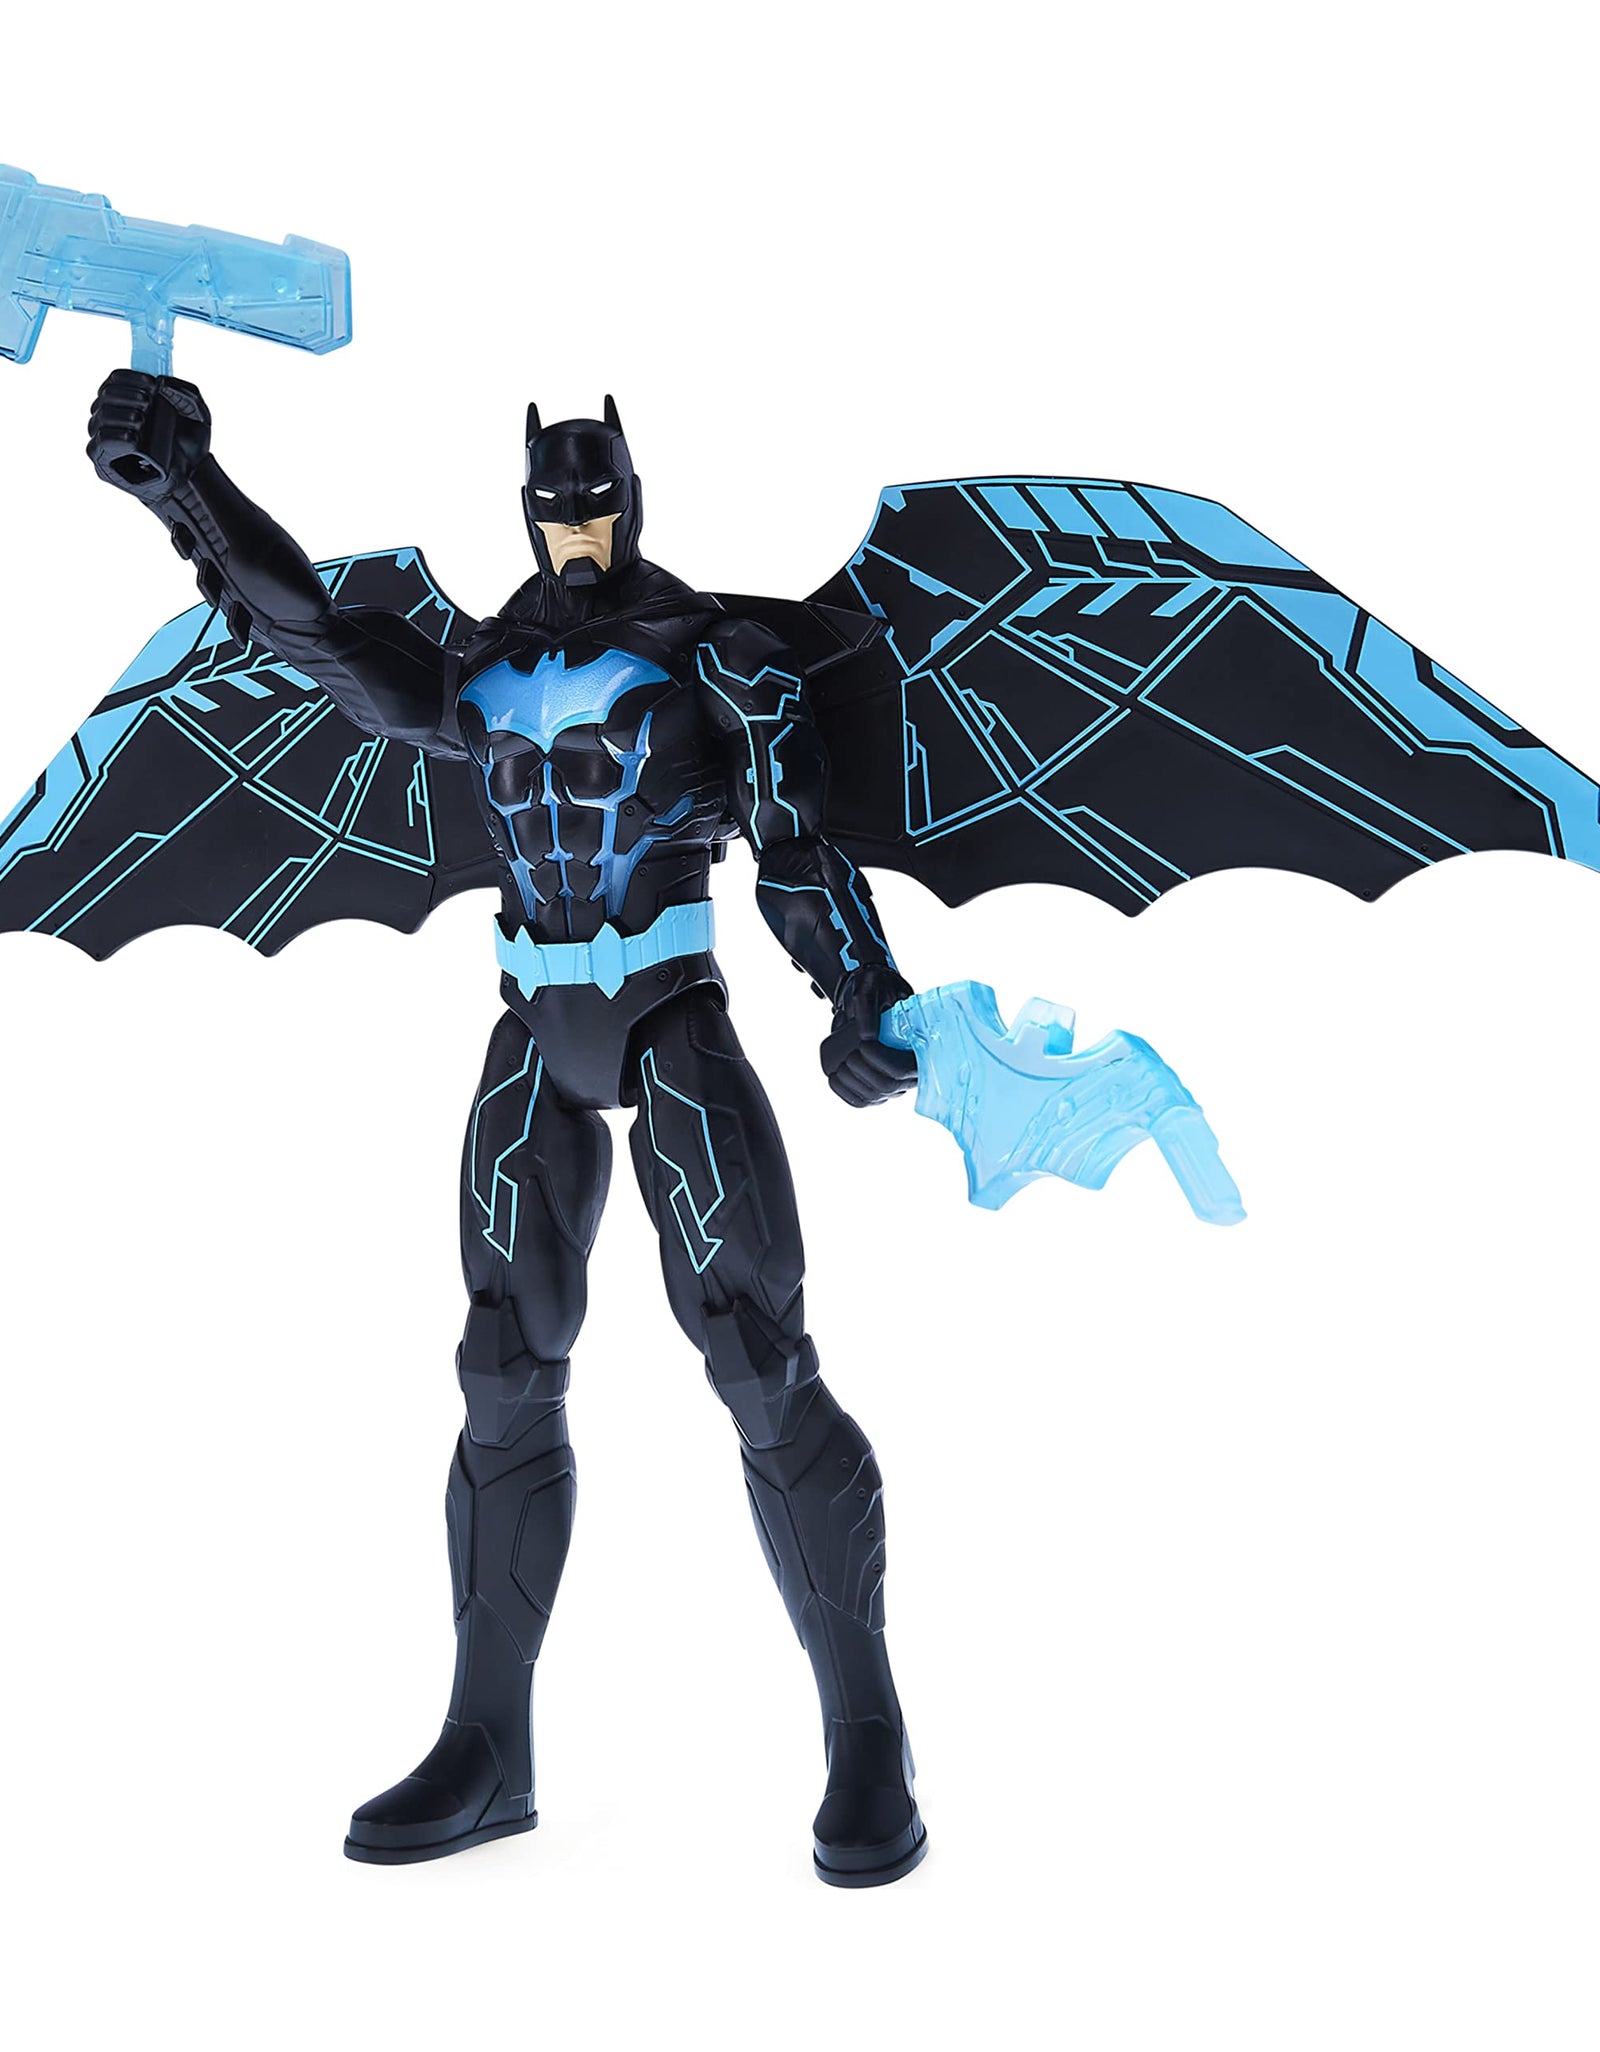 DC Comics Batman Bat-Tech 12-inch Deluxe Action Figure with Expanding Wings, Lights and Over 20 Sounds, Kids Toys for Boys